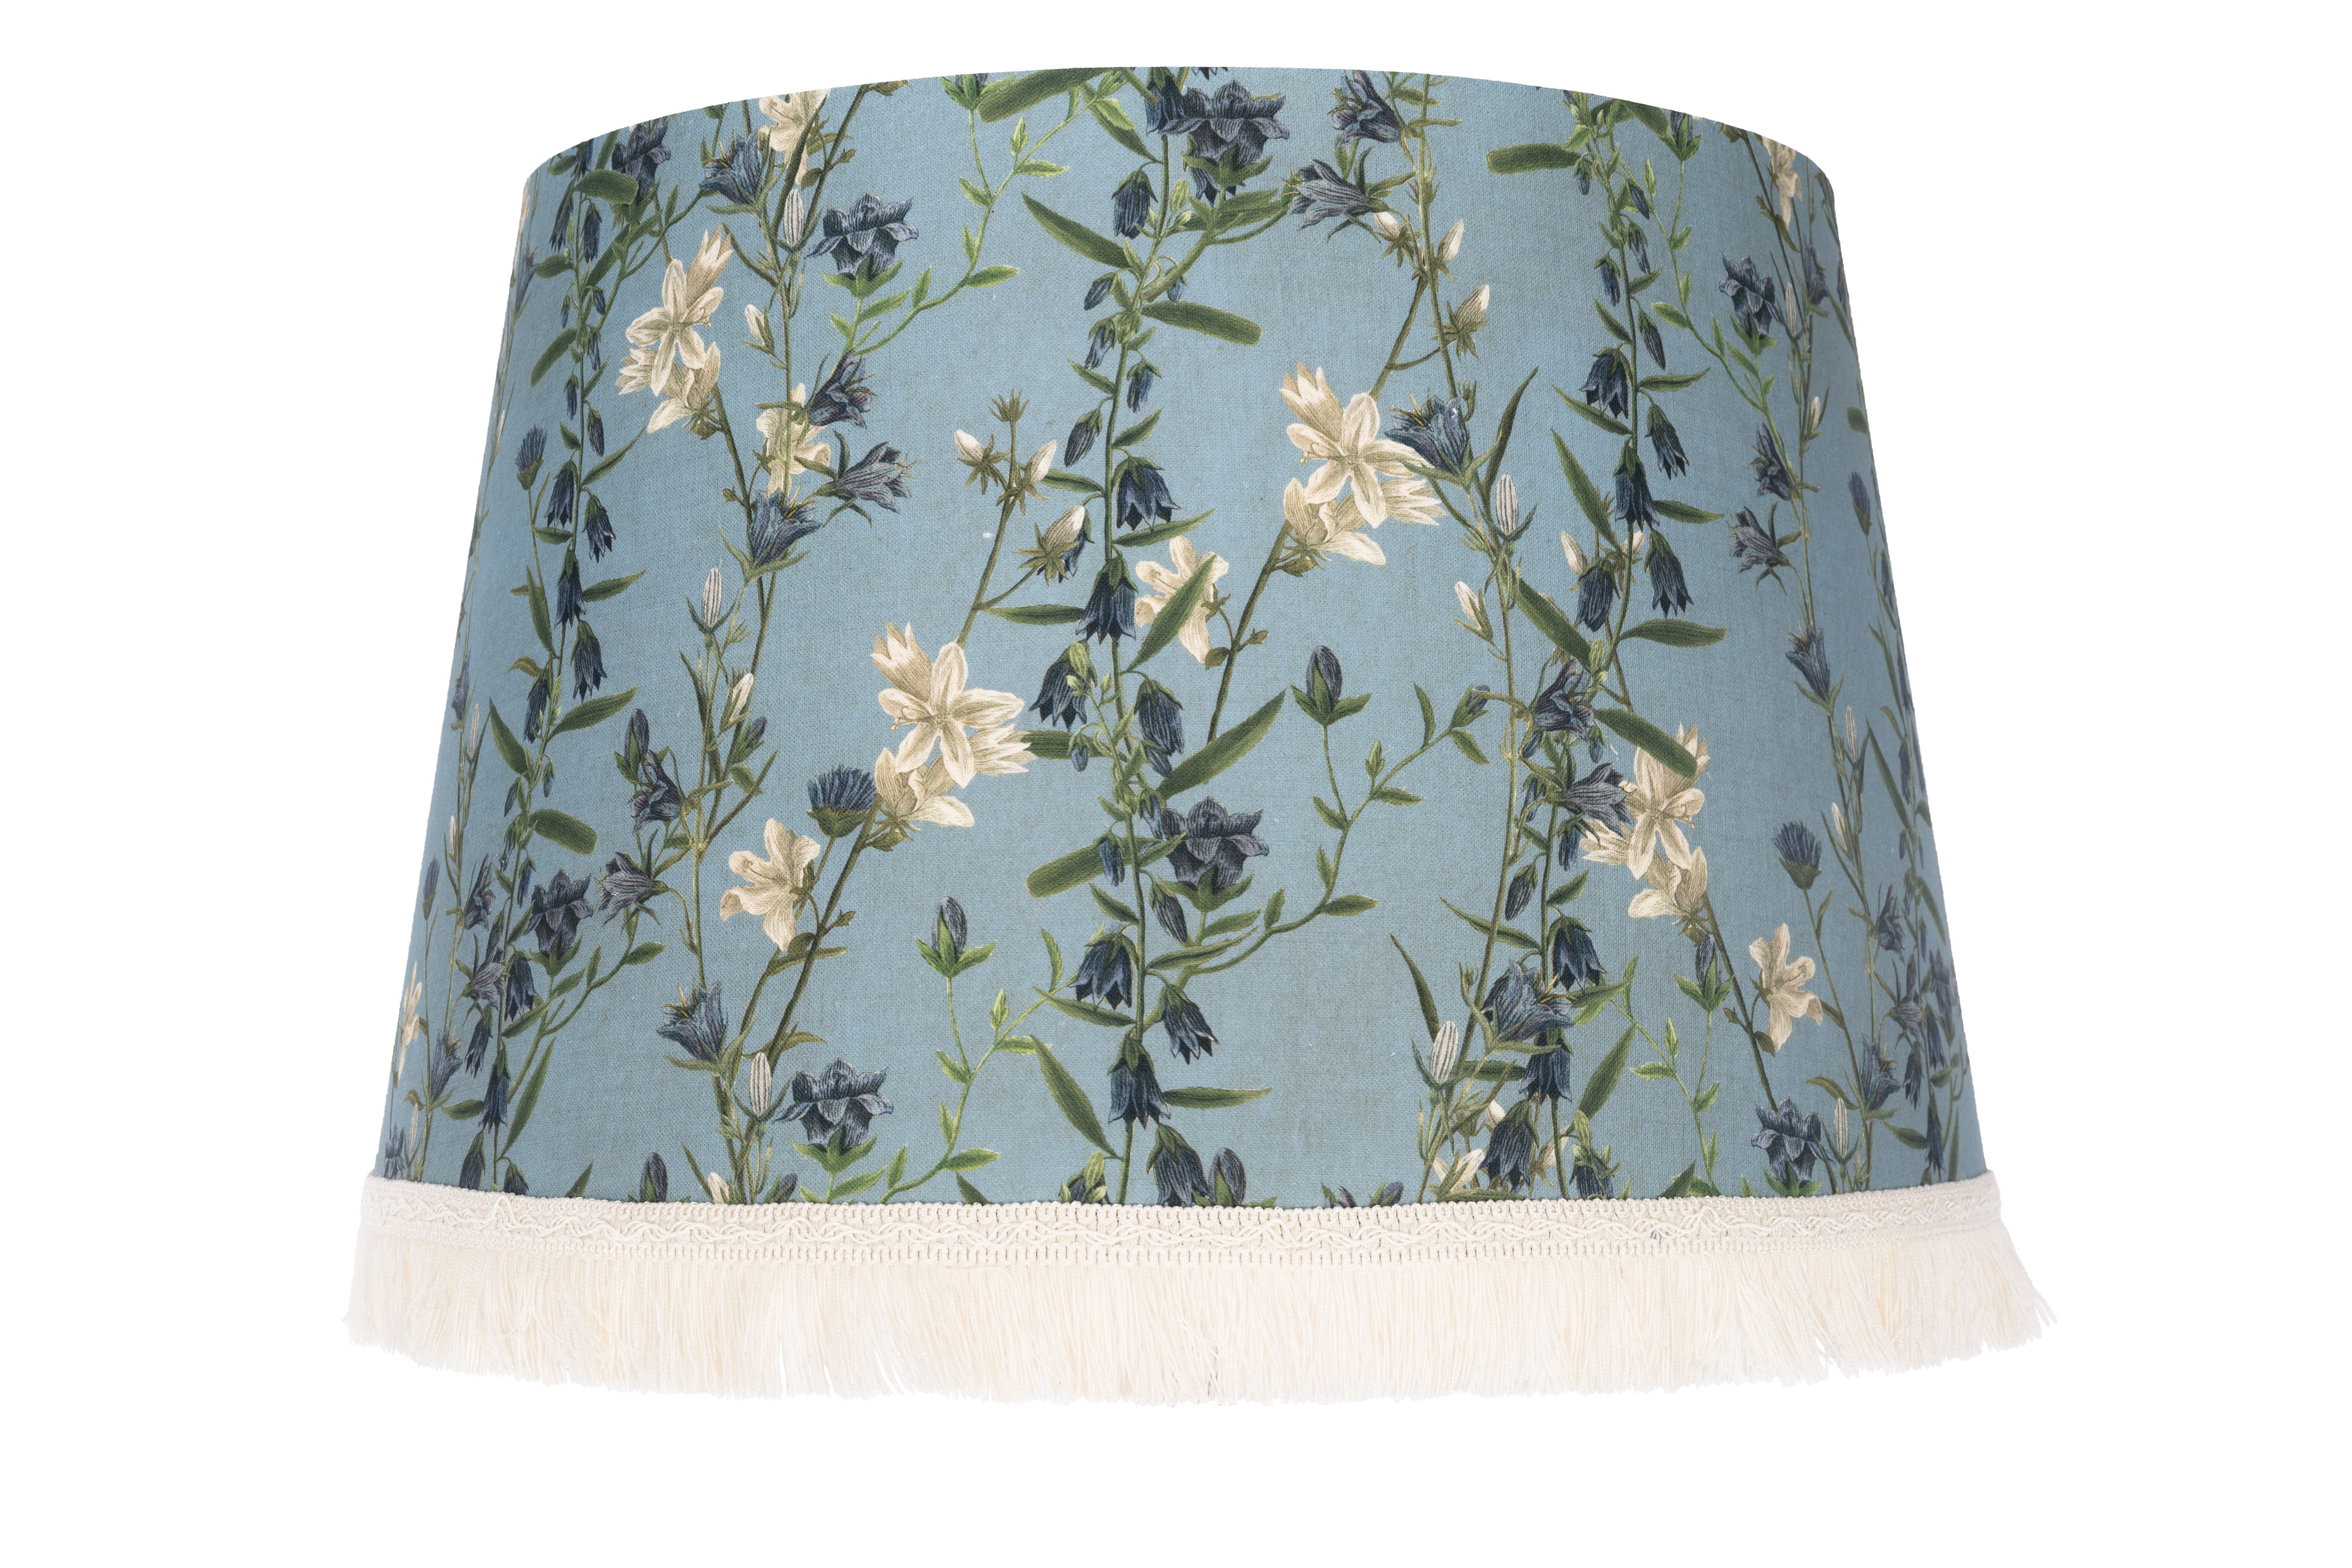 DELICATE BLOOM Lampshade 25cm x 35cm x Height 25cm